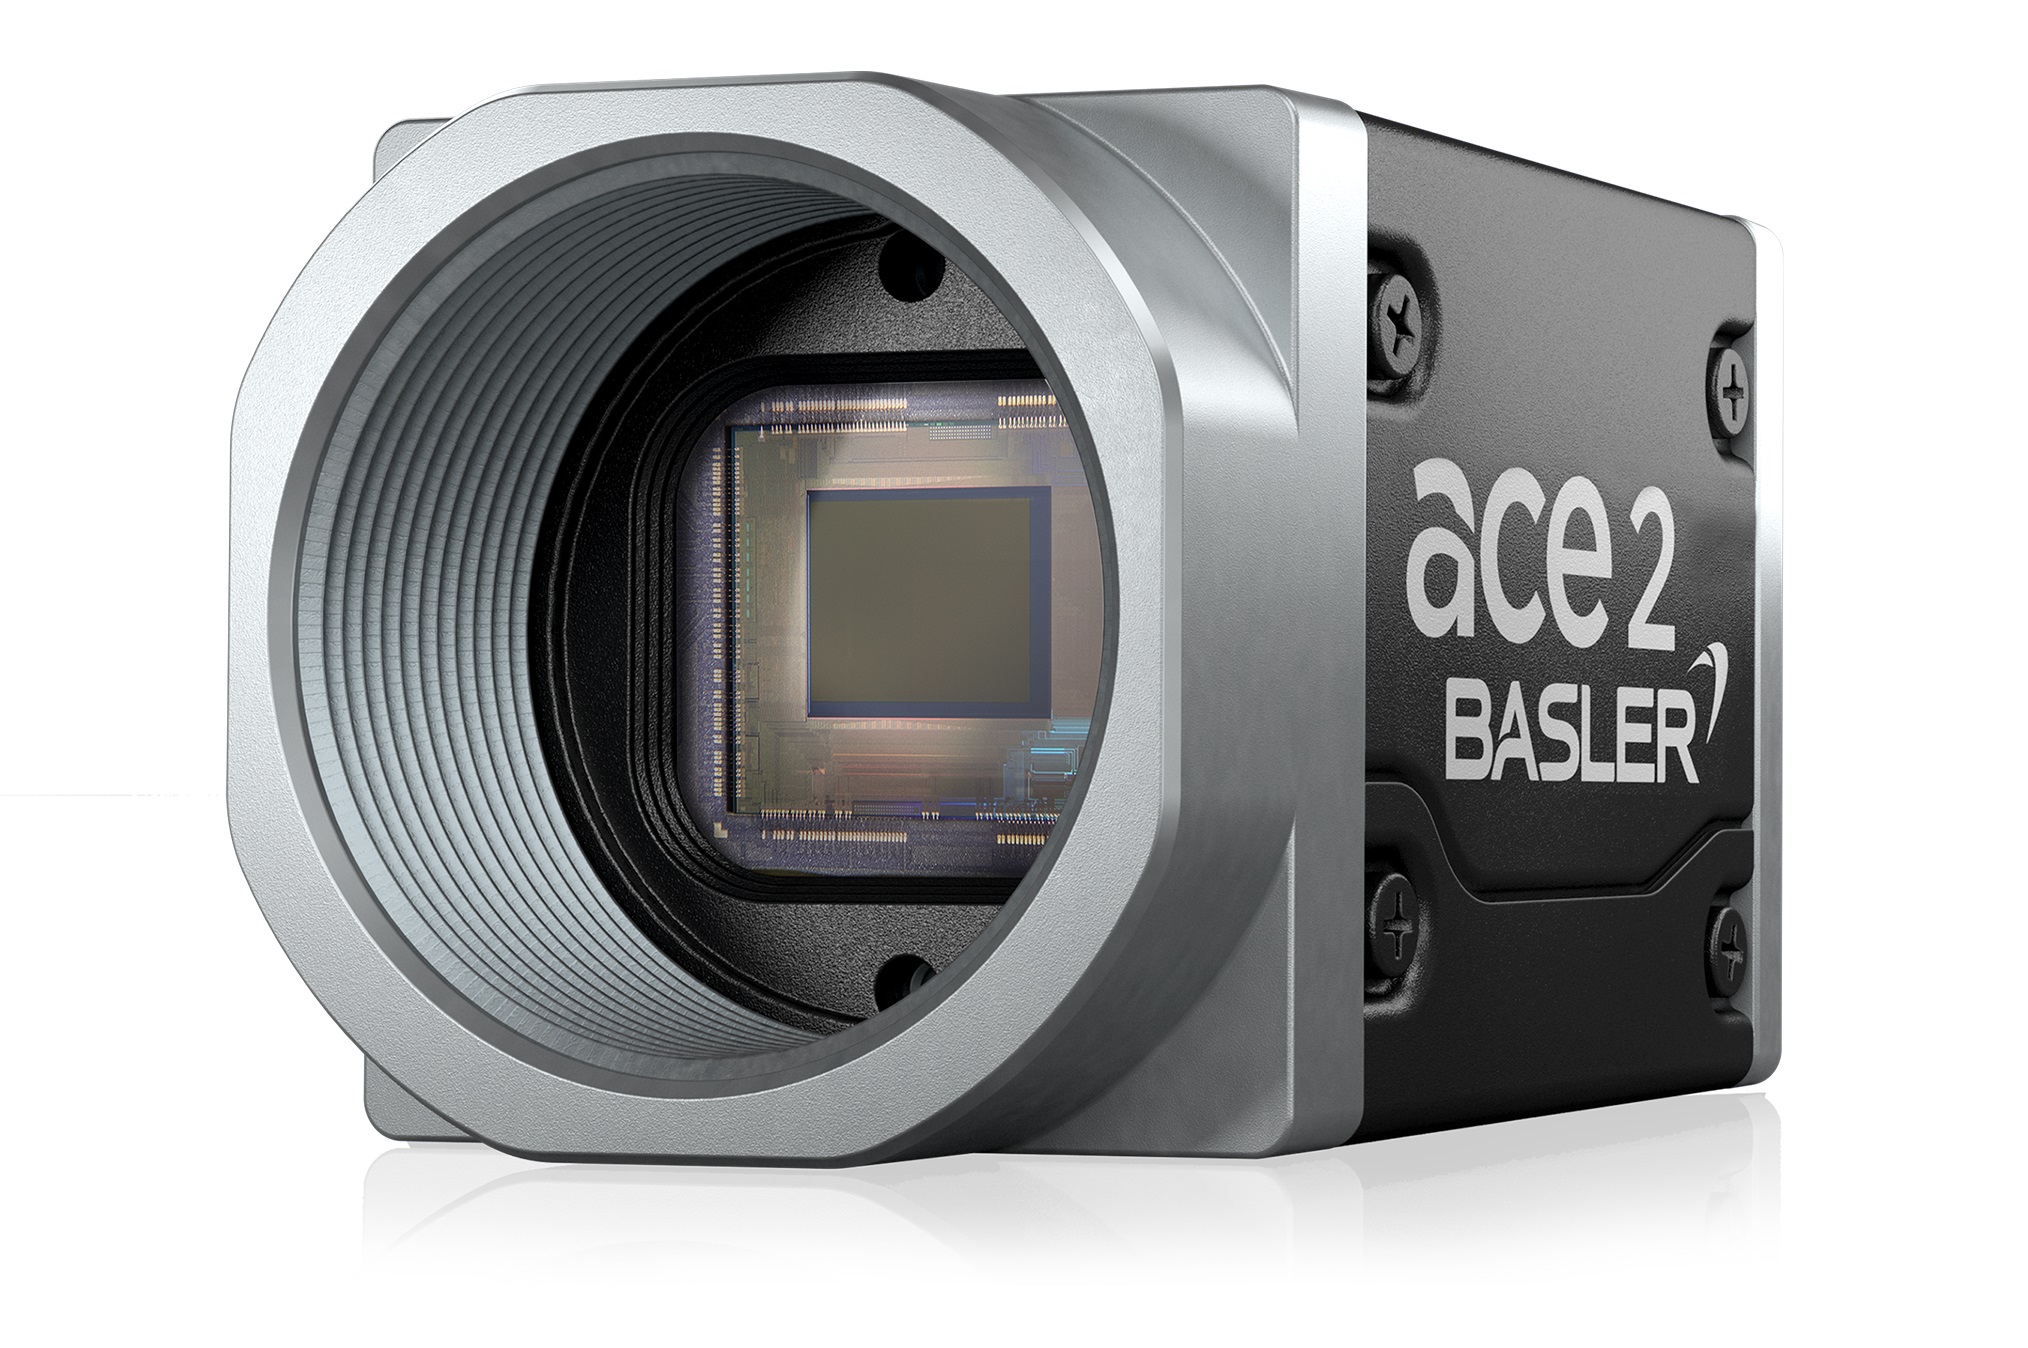 ace 2 X visSWIR cameras - high image quality, compact, and affordable